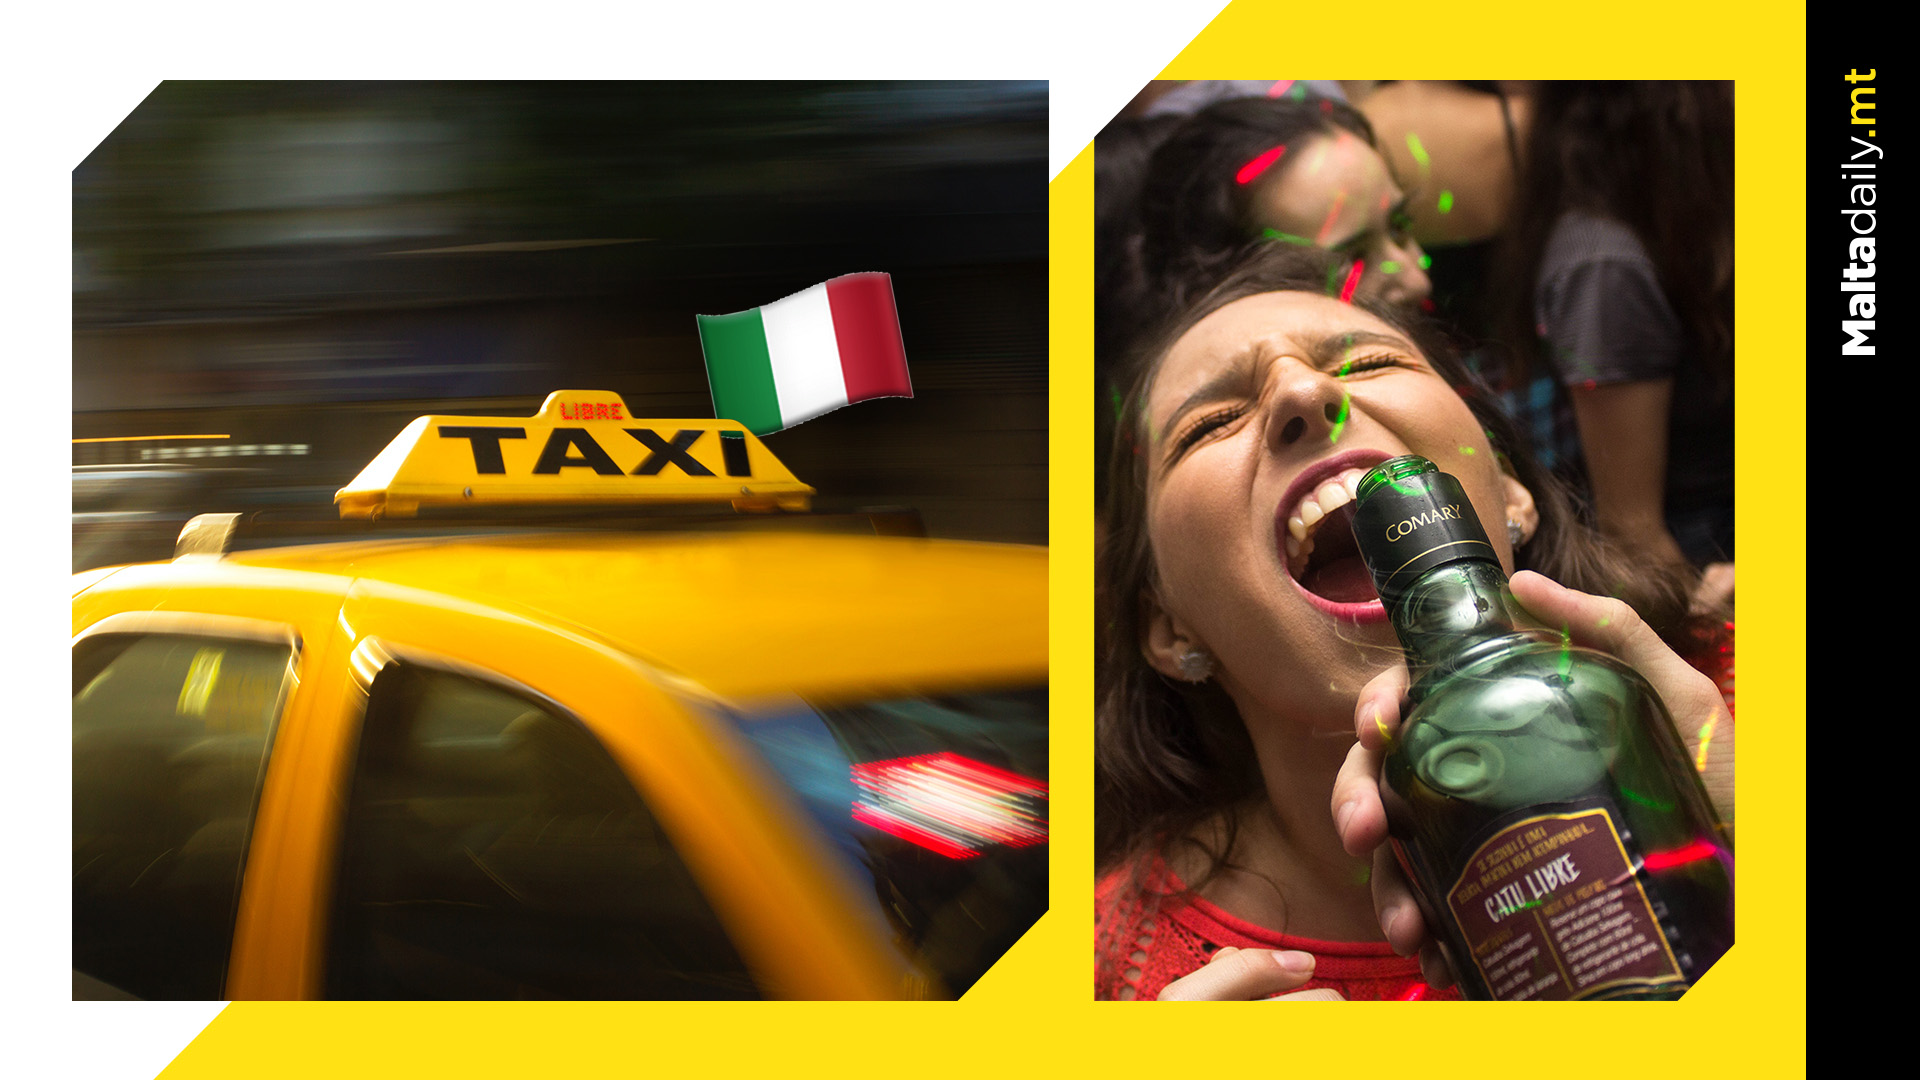 Italy to Give Drunk People Free Taxi Rides to Reduce Drunk Driving